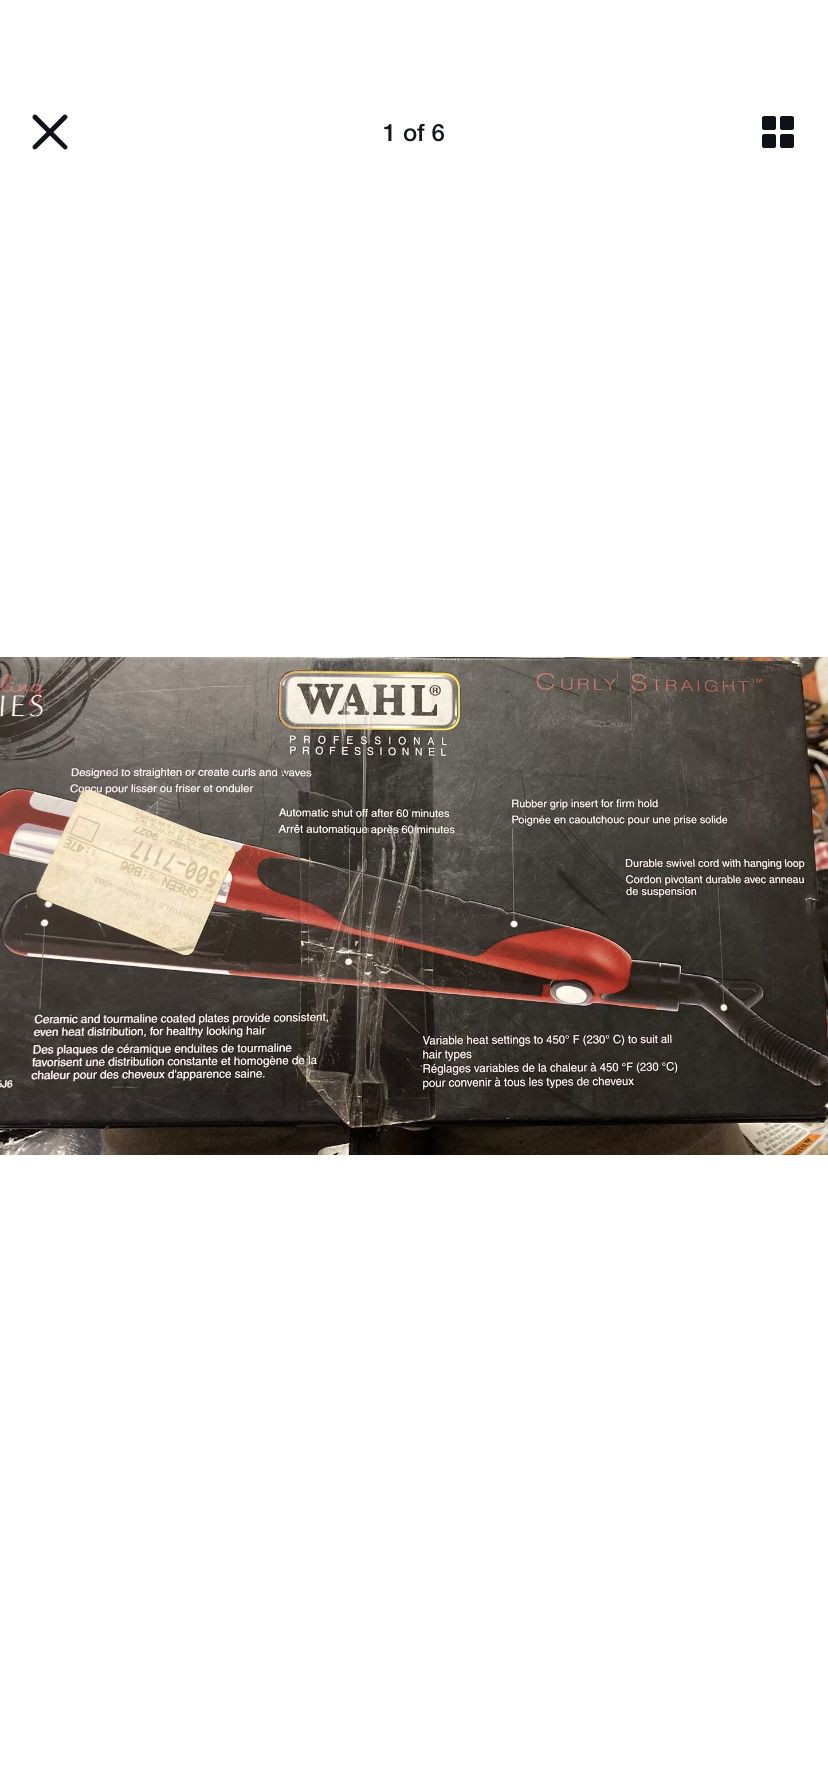 NEW - WAHL Styling Series- Hair Straightener Curling Iron Flat Iron